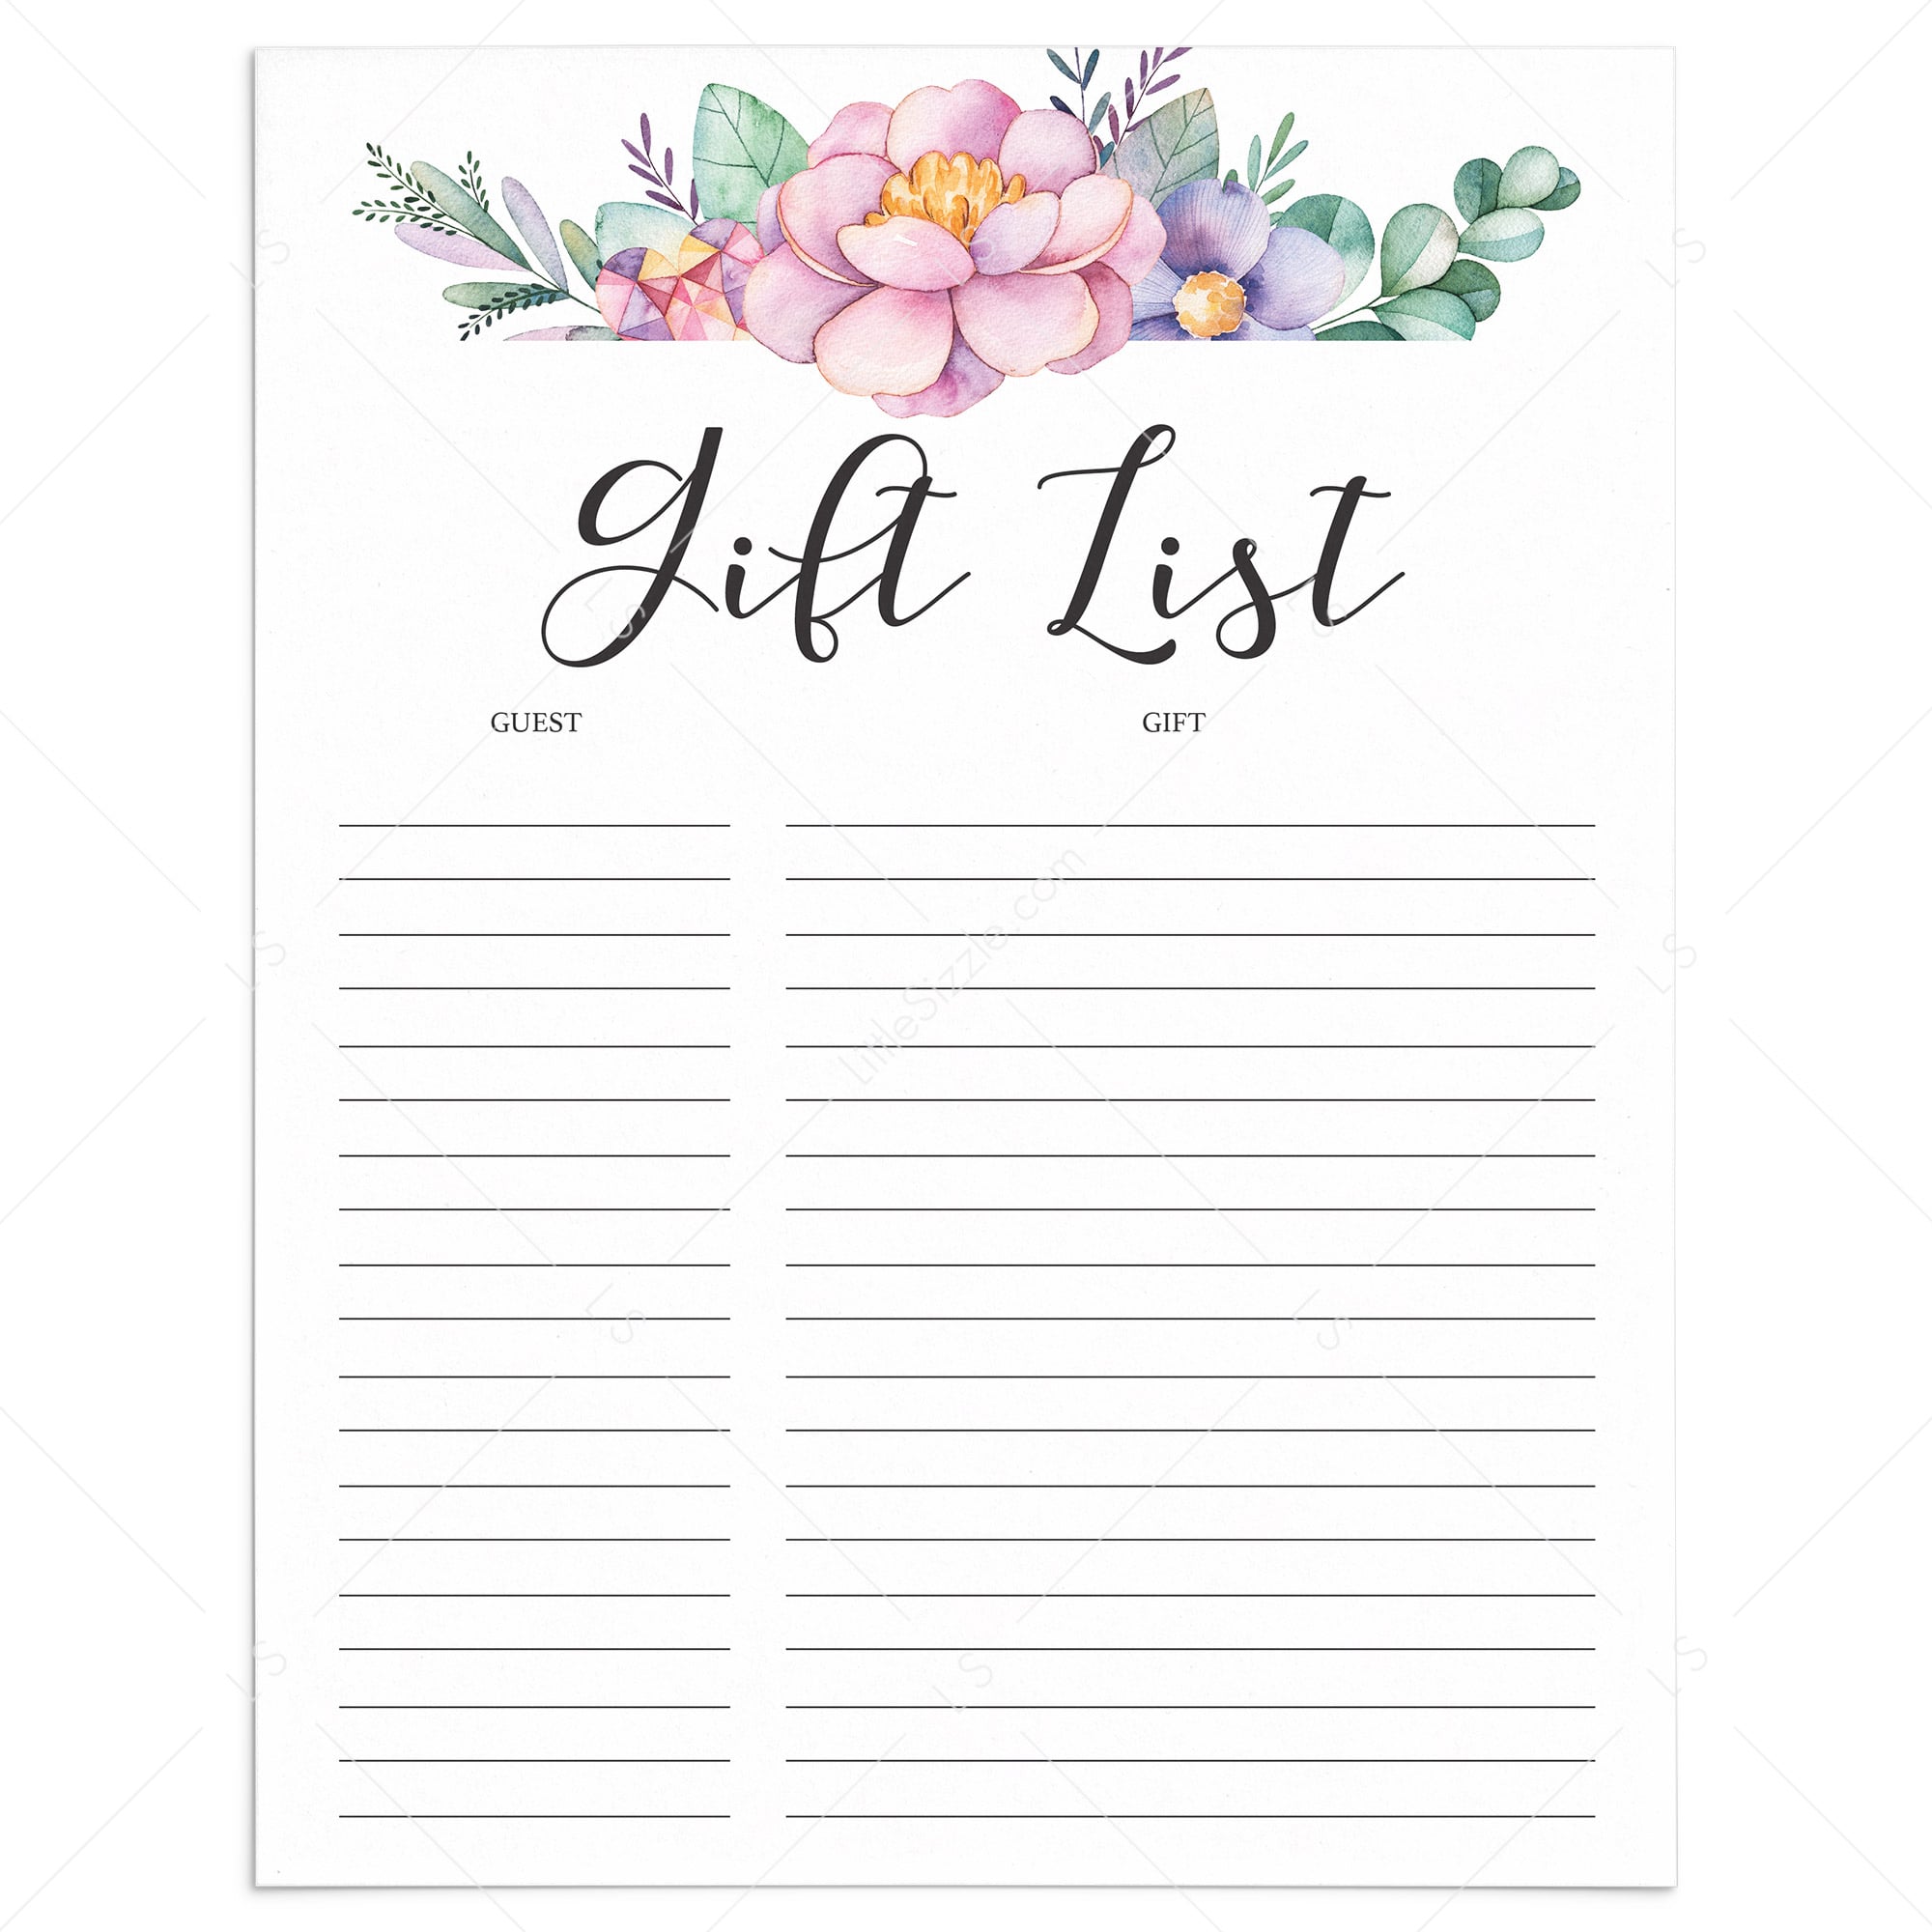 Printable guest and gift tracker for floral shower by LittleSizzle